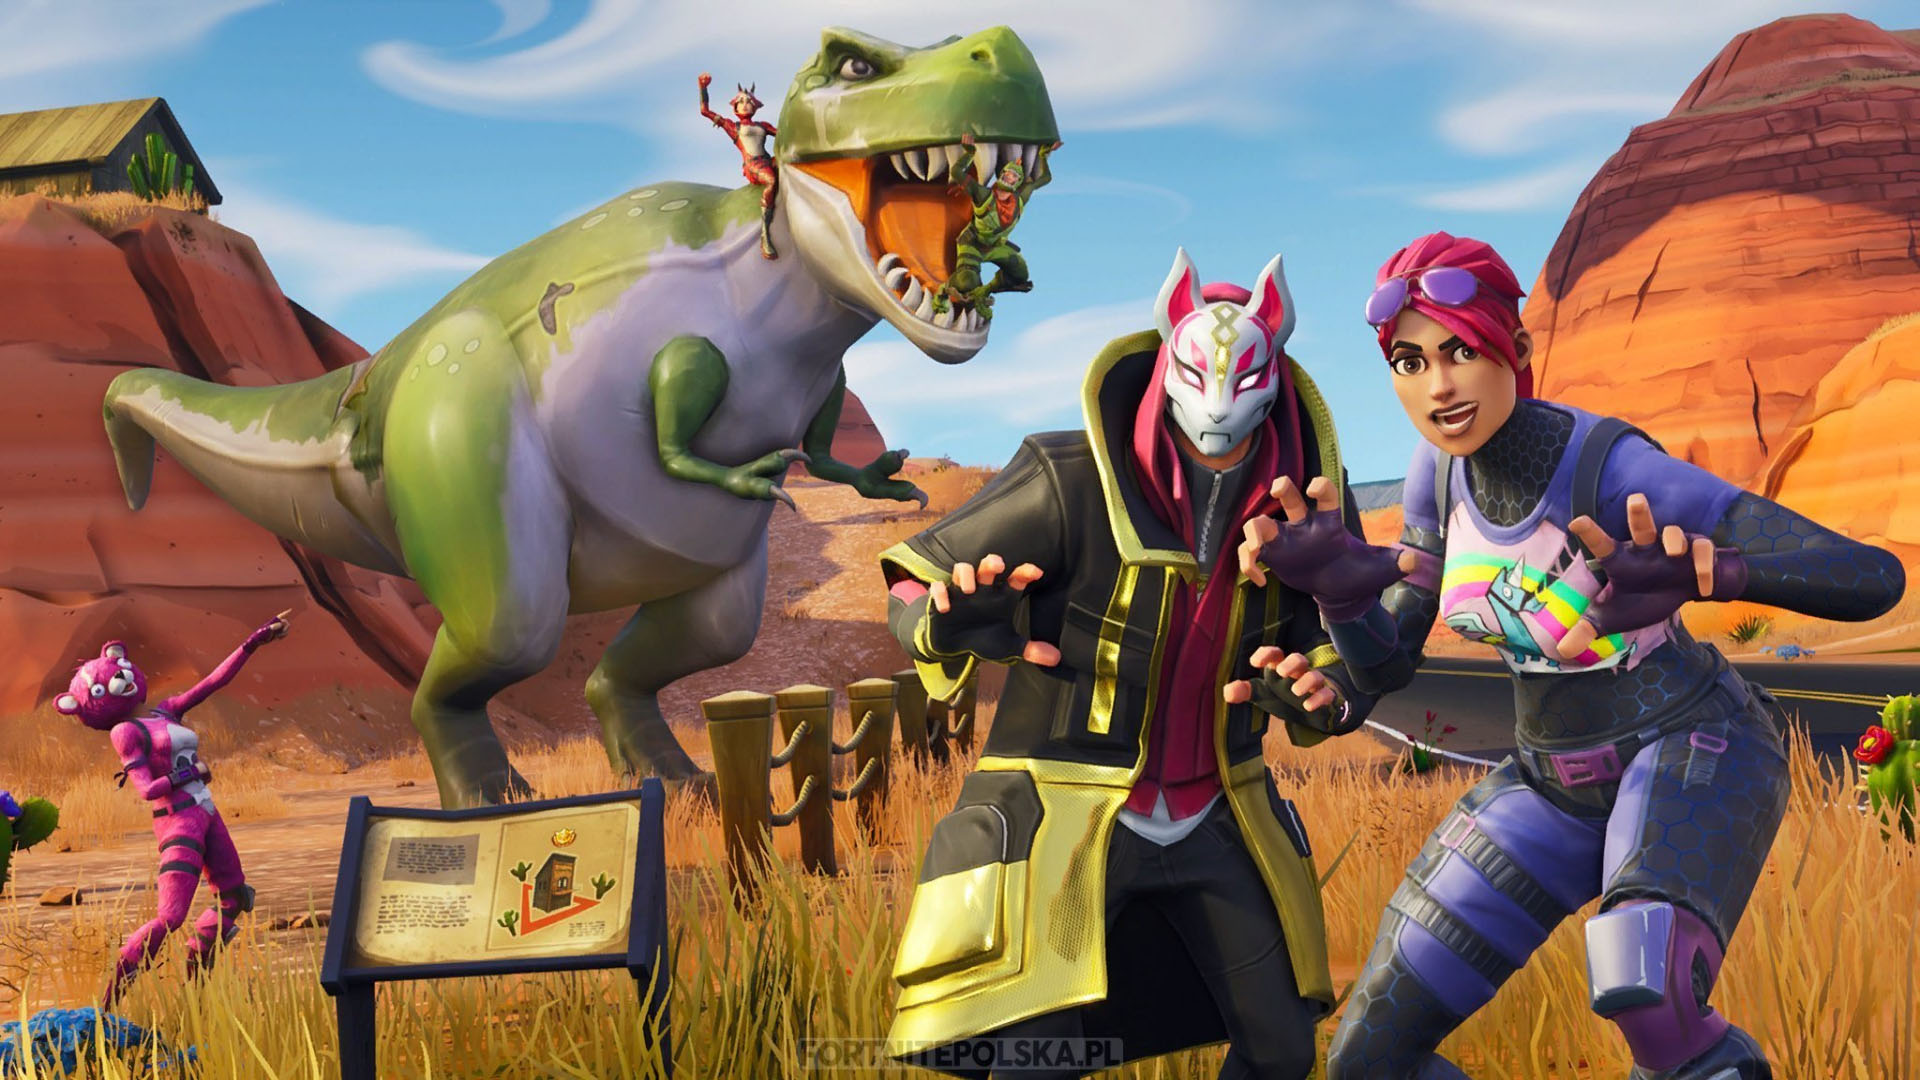 Fortnite Privacy Policy - Fortnite Season X has no free challenges | PCGamesN - You will be notified of any privacy policy changes